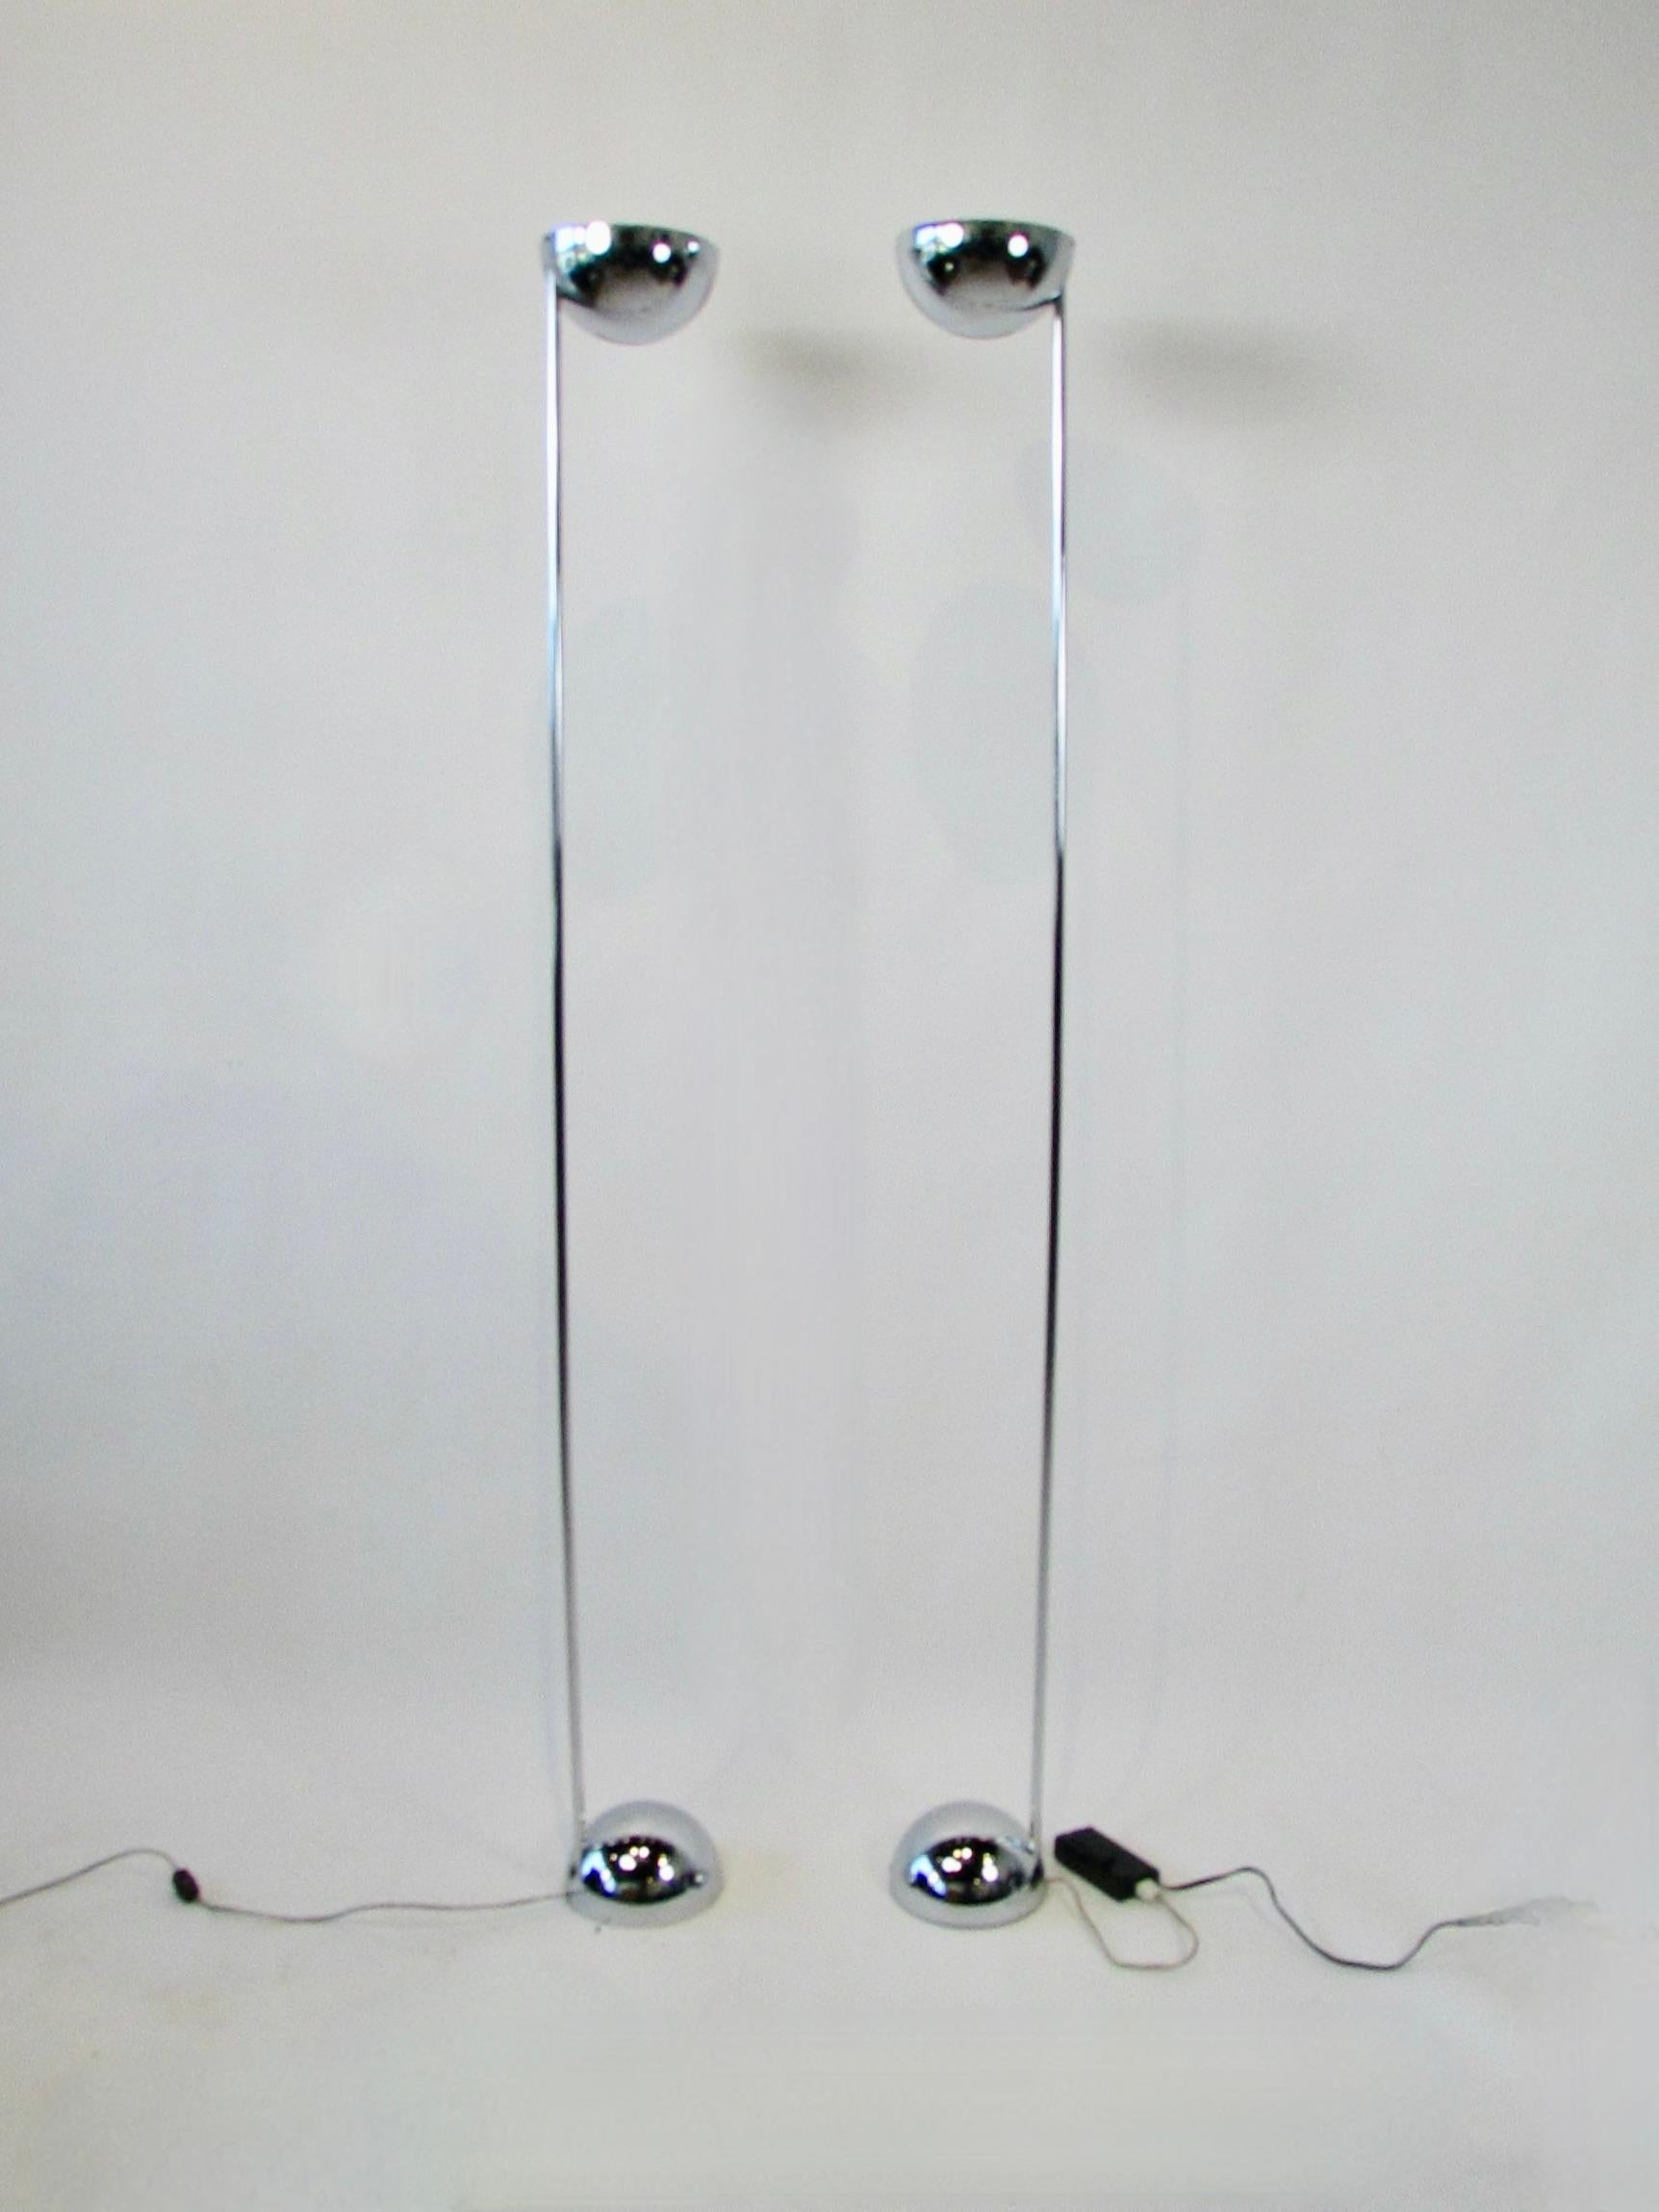 Pair of George Kovacs Post Modern Chrome Torchieres In Good Condition For Sale In Ferndale, MI